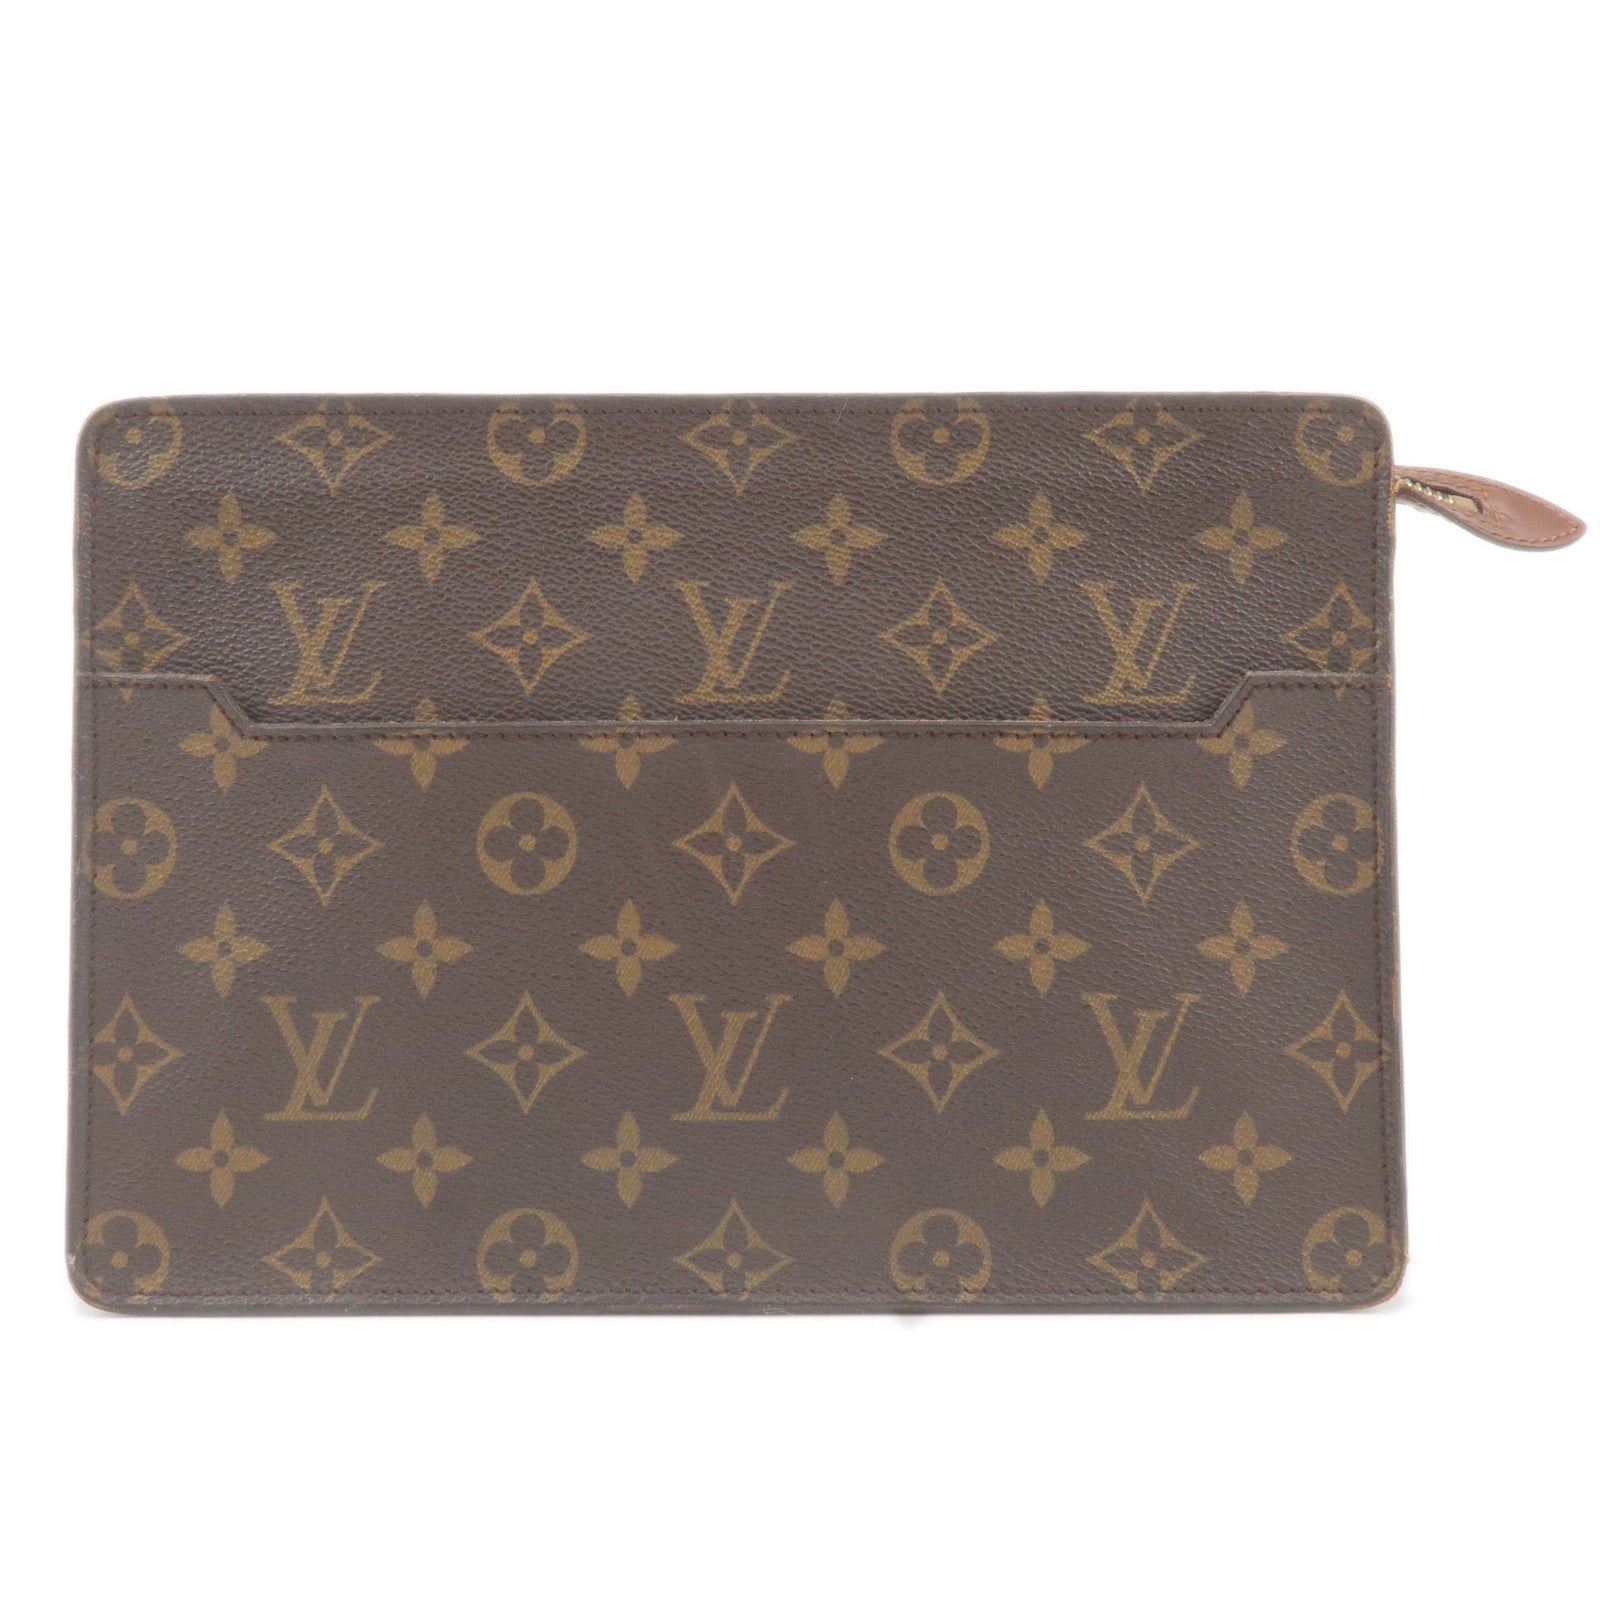 Is Kendall Jenner's Vintage Louis Vuitton Fanny Pack Fake: An